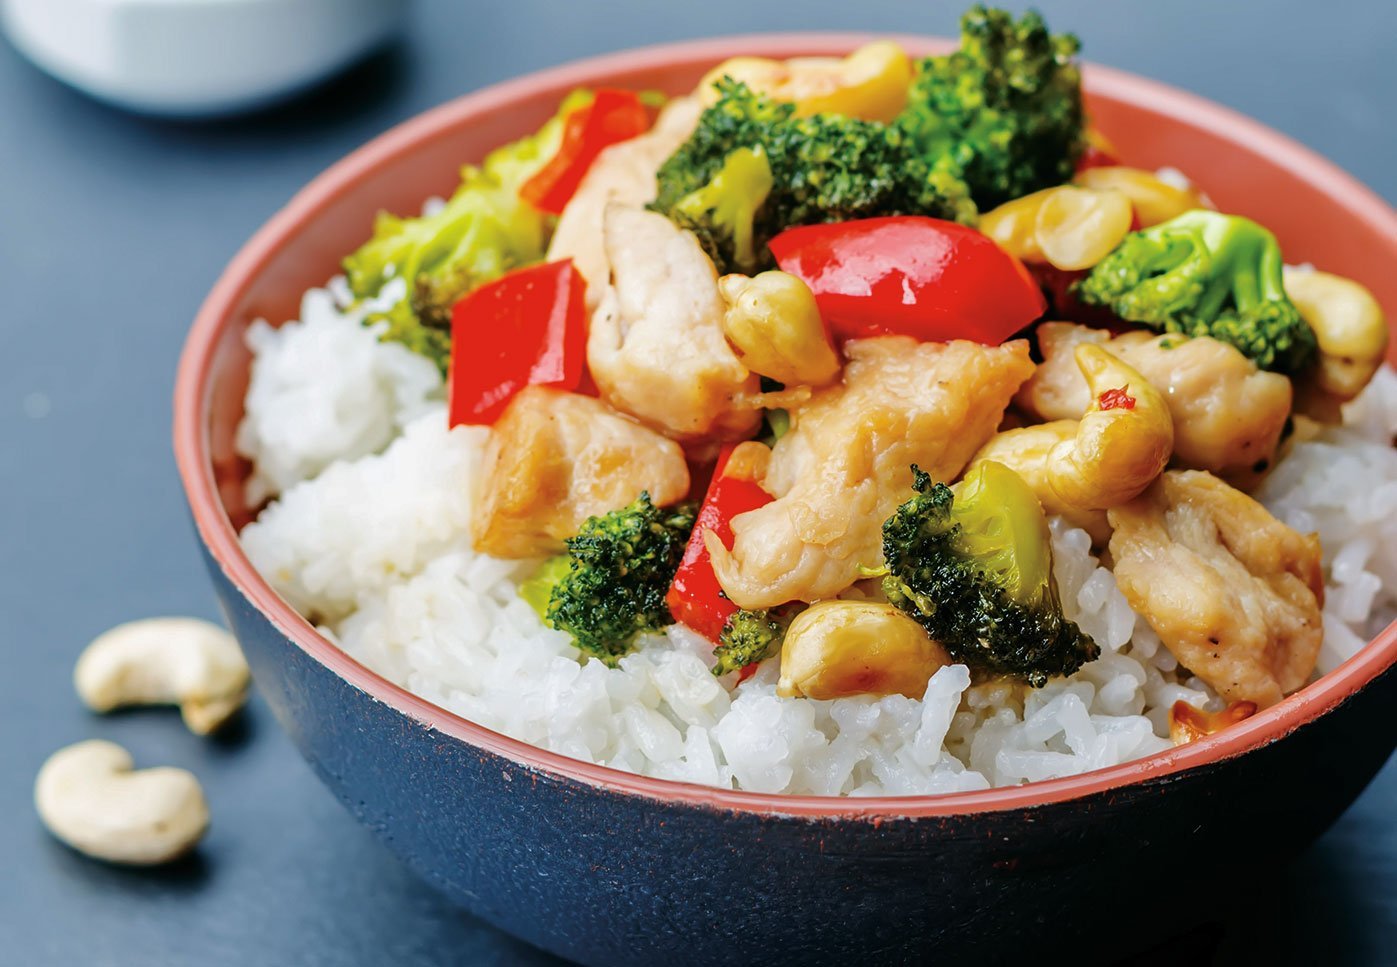 Red Pepper Broccoli Cashew Chicken Stir Fry With Rice